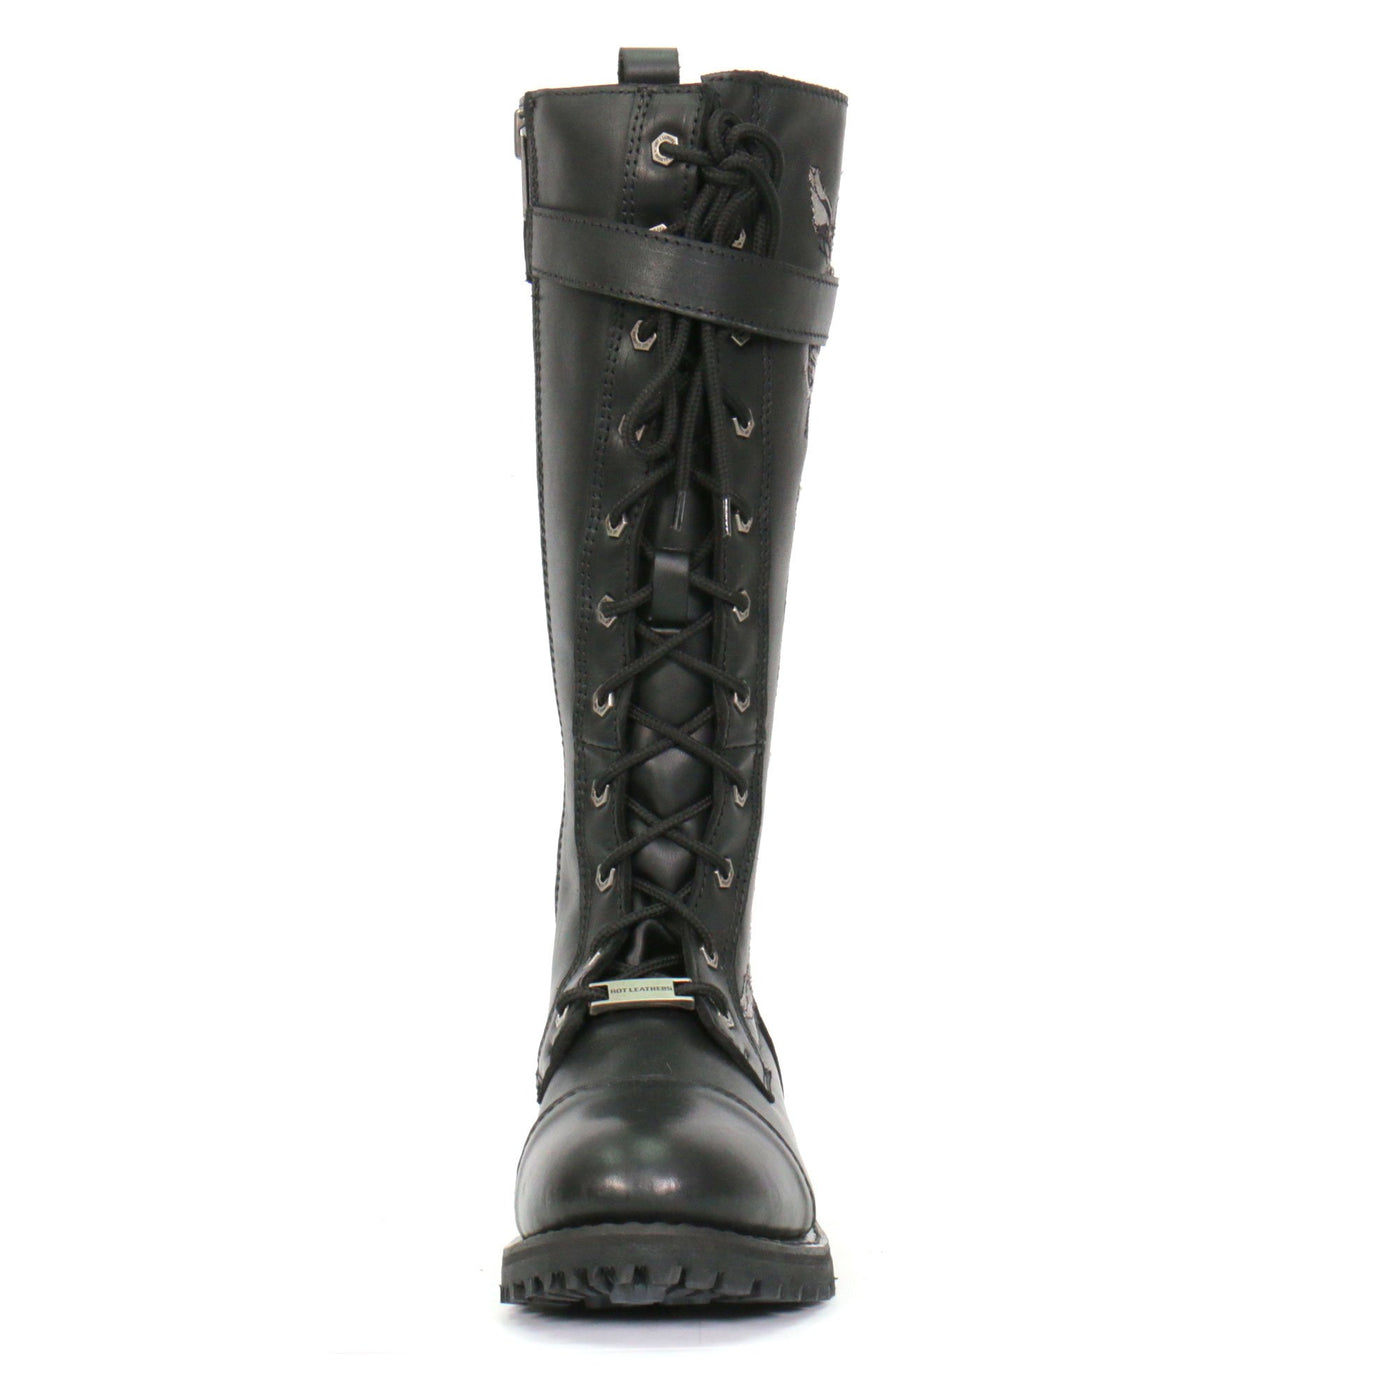 Description: Hot Leathers Women's Knee High Wild Roses Leather Boots, a women's black combat boot with laces, made of top grain leather.